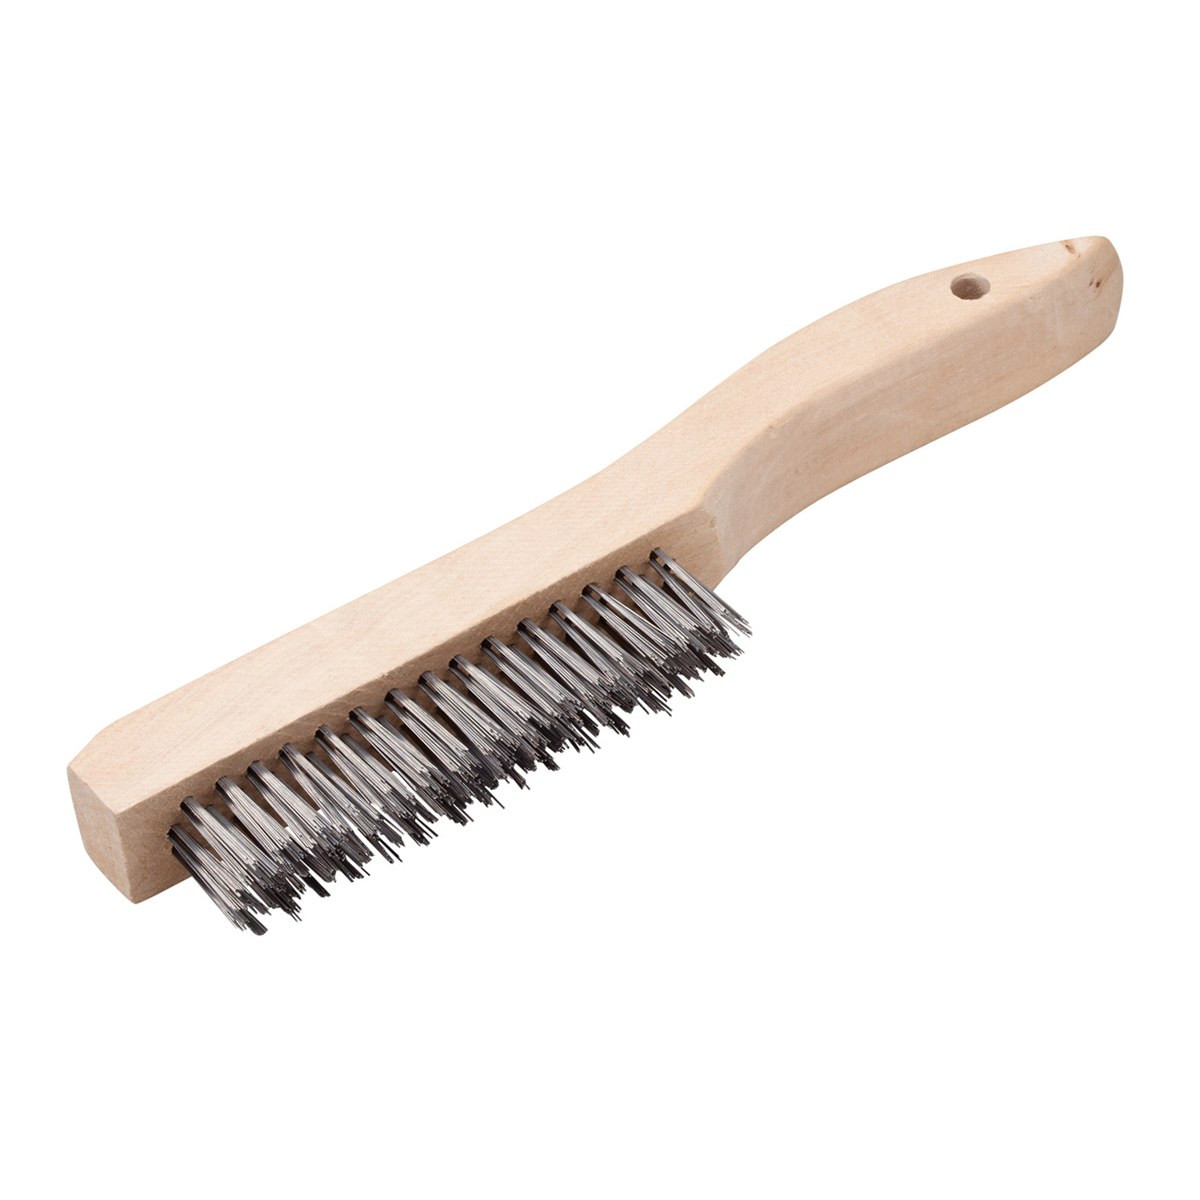 B-4 STNLESS STEEL WIRE BRUSH SM - Brushes and Fin Combs